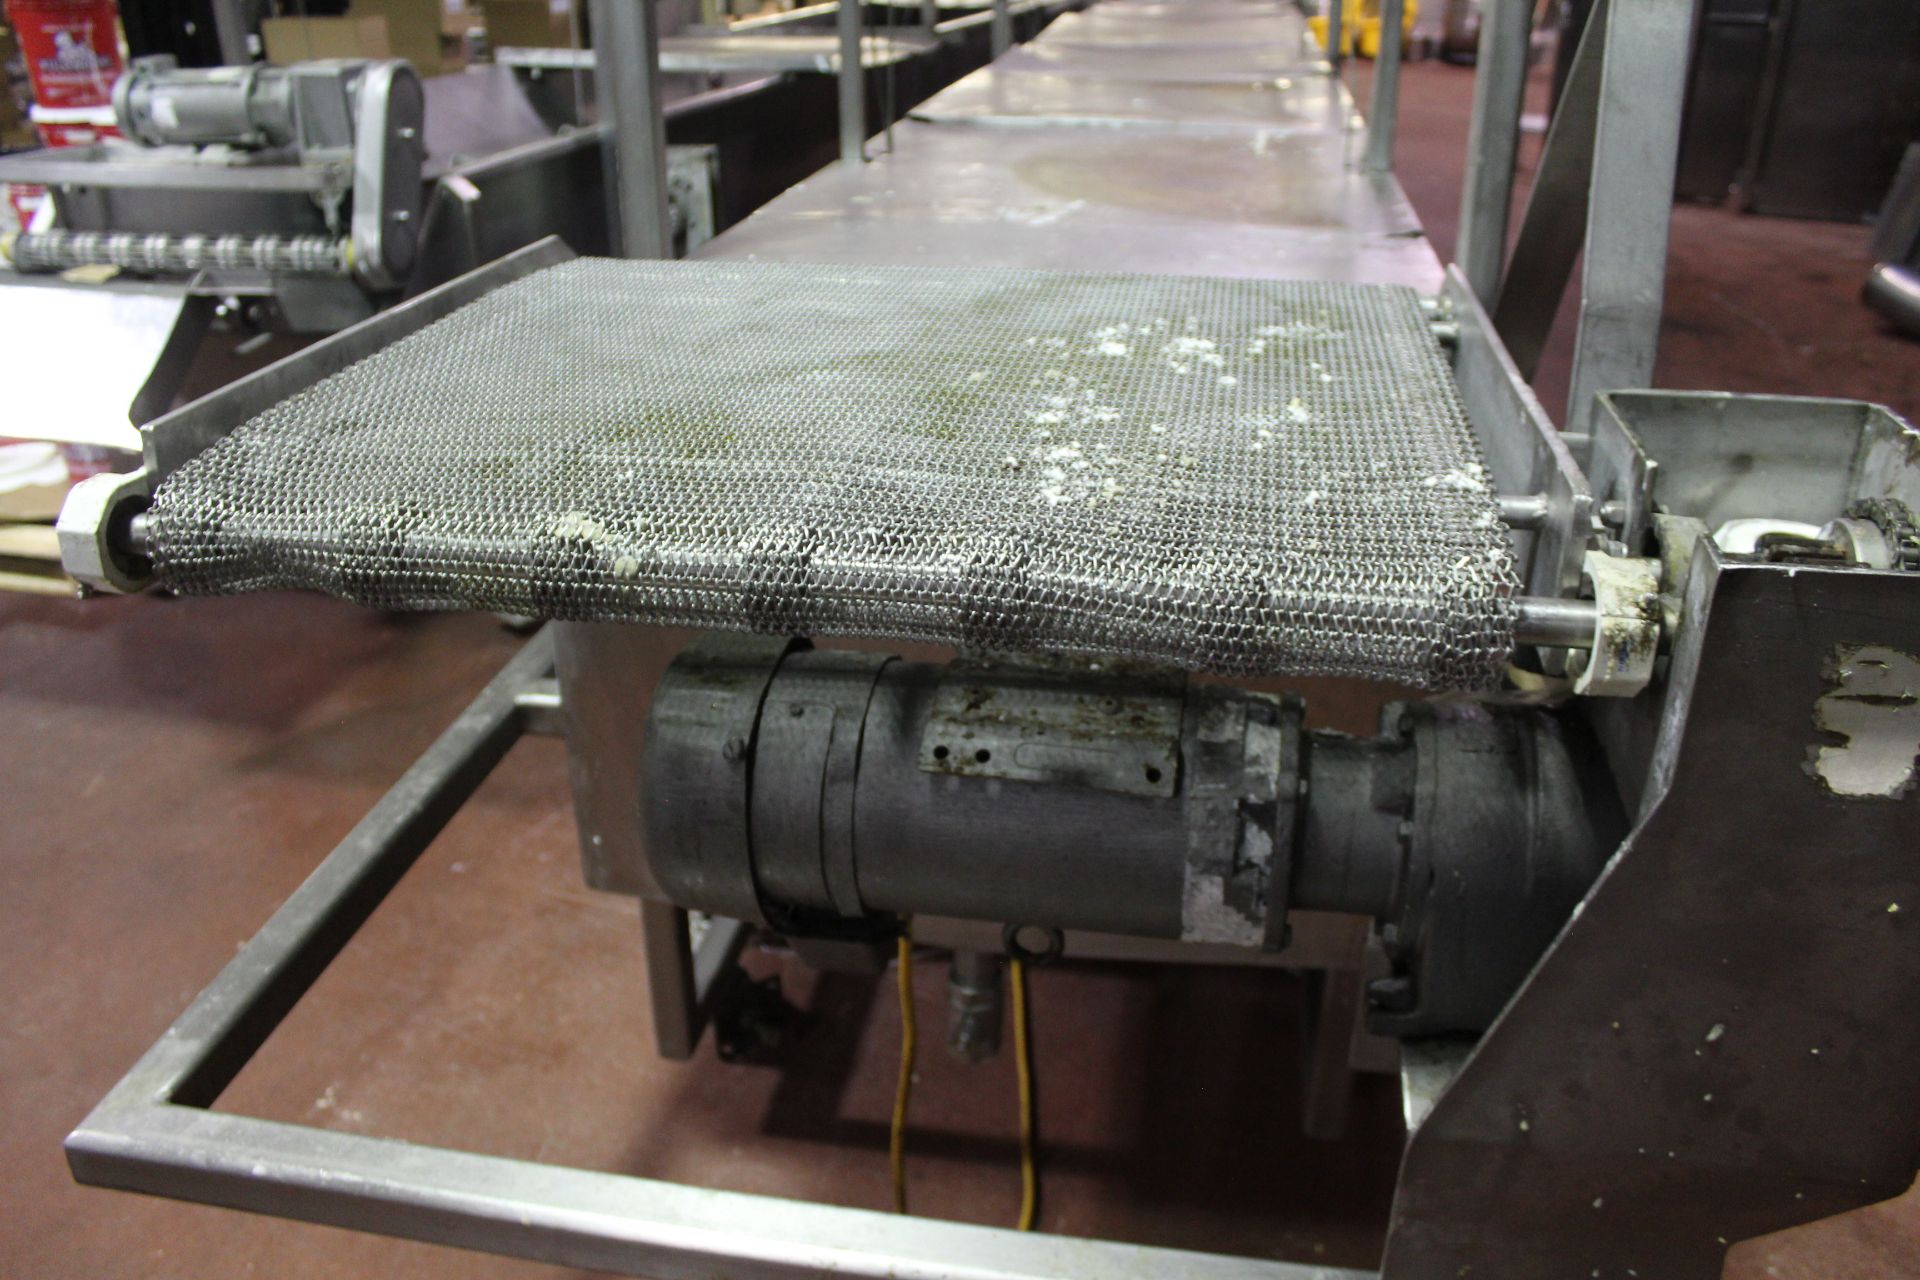 Stainless Steel Continuous Submersion Cooking Conveyor with Top Hold Down Belt, 30" Belts, 35"W X 23 - Image 2 of 4